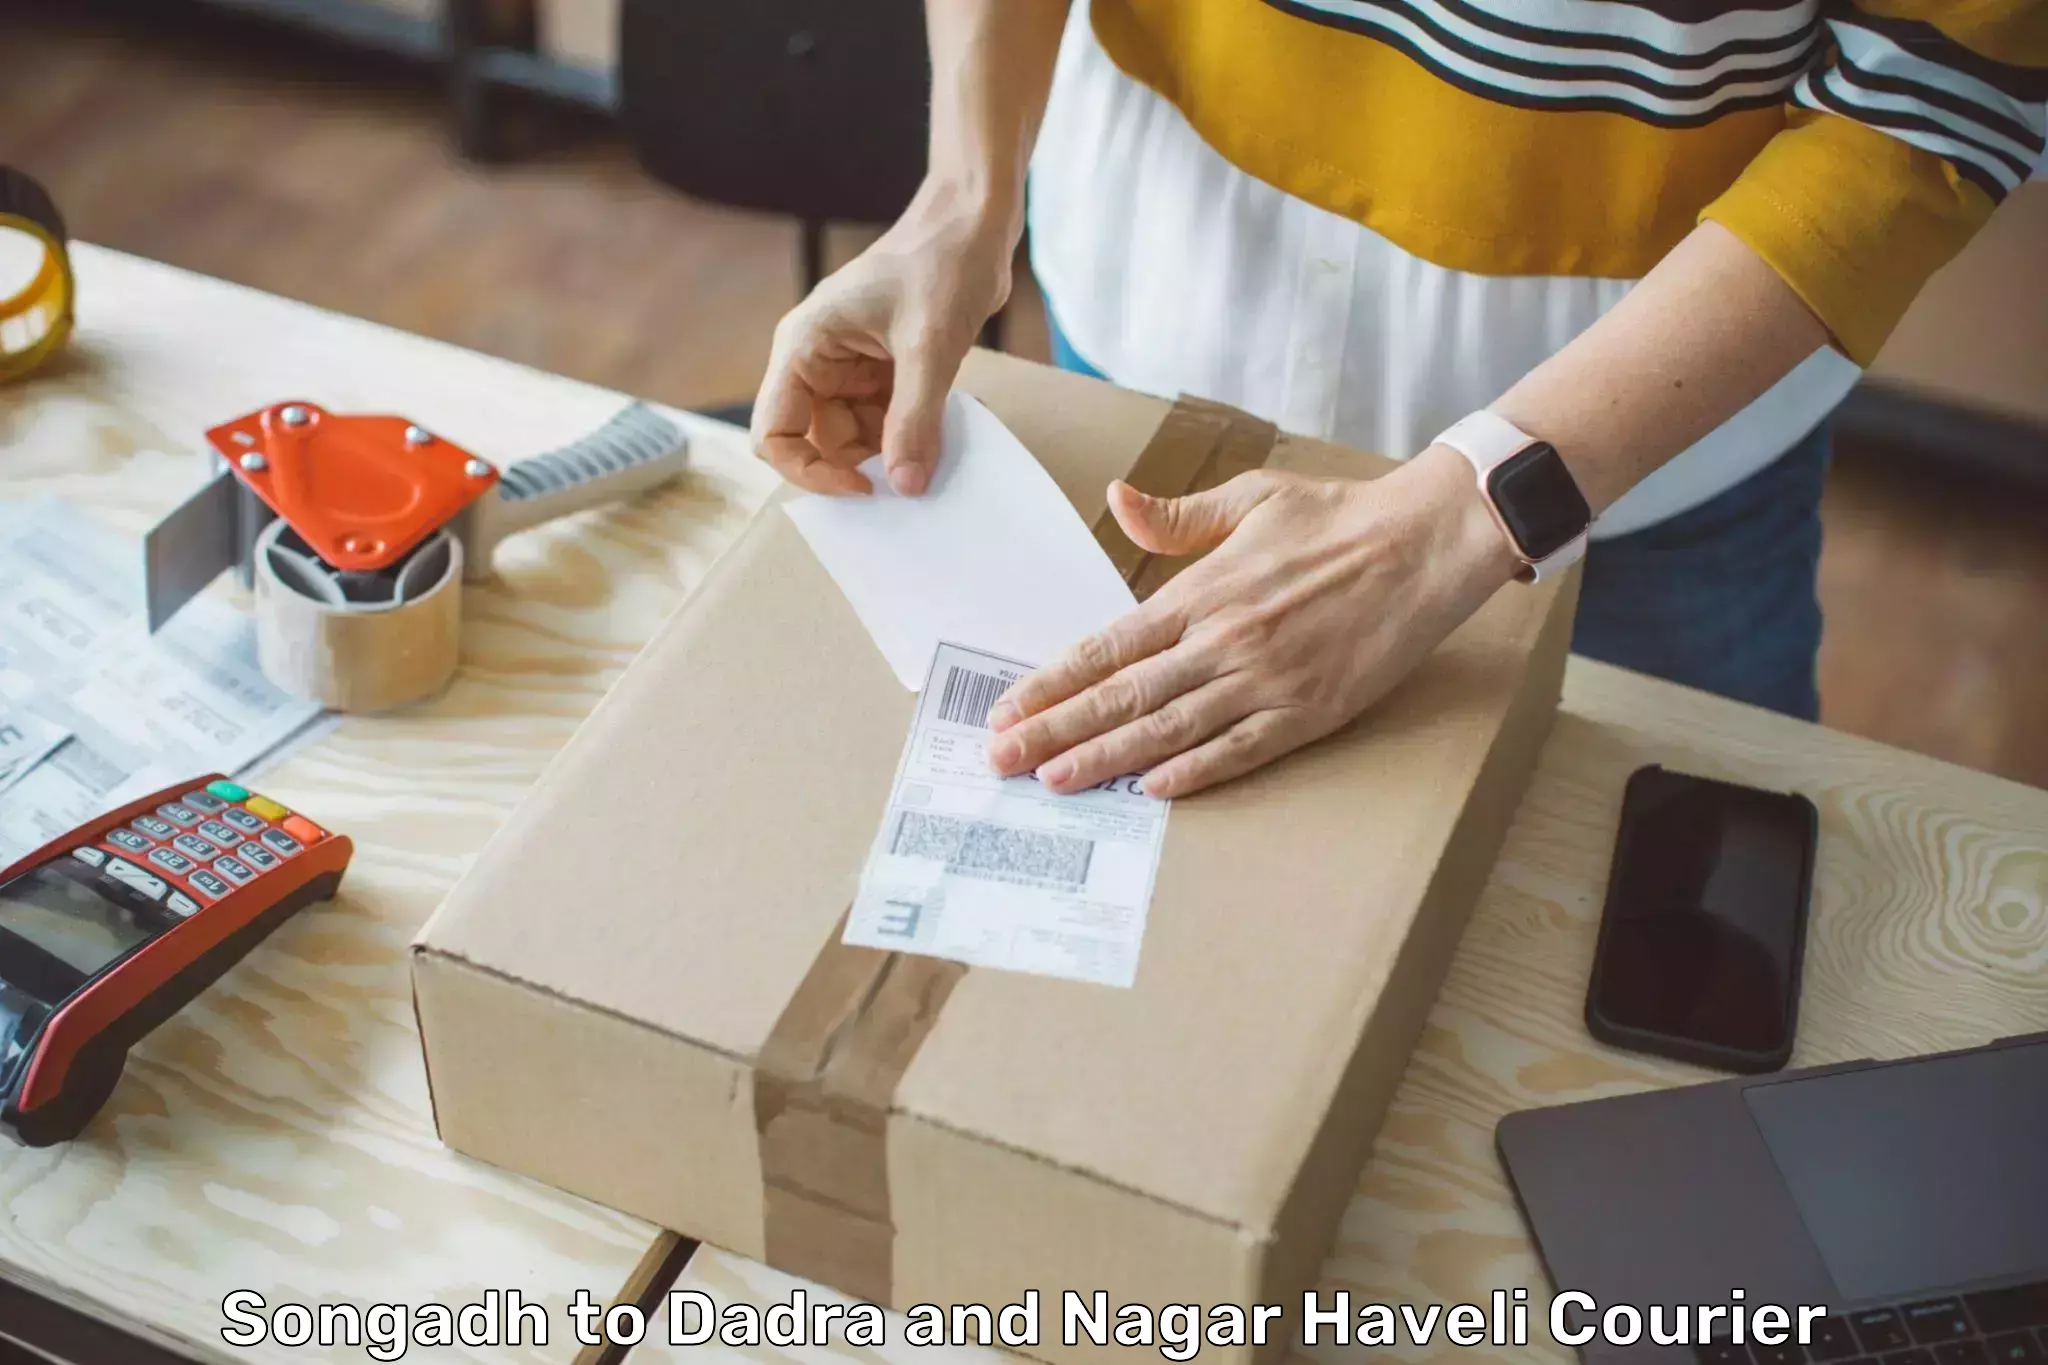 Multi-service courier options Songadh to Dadra and Nagar Haveli